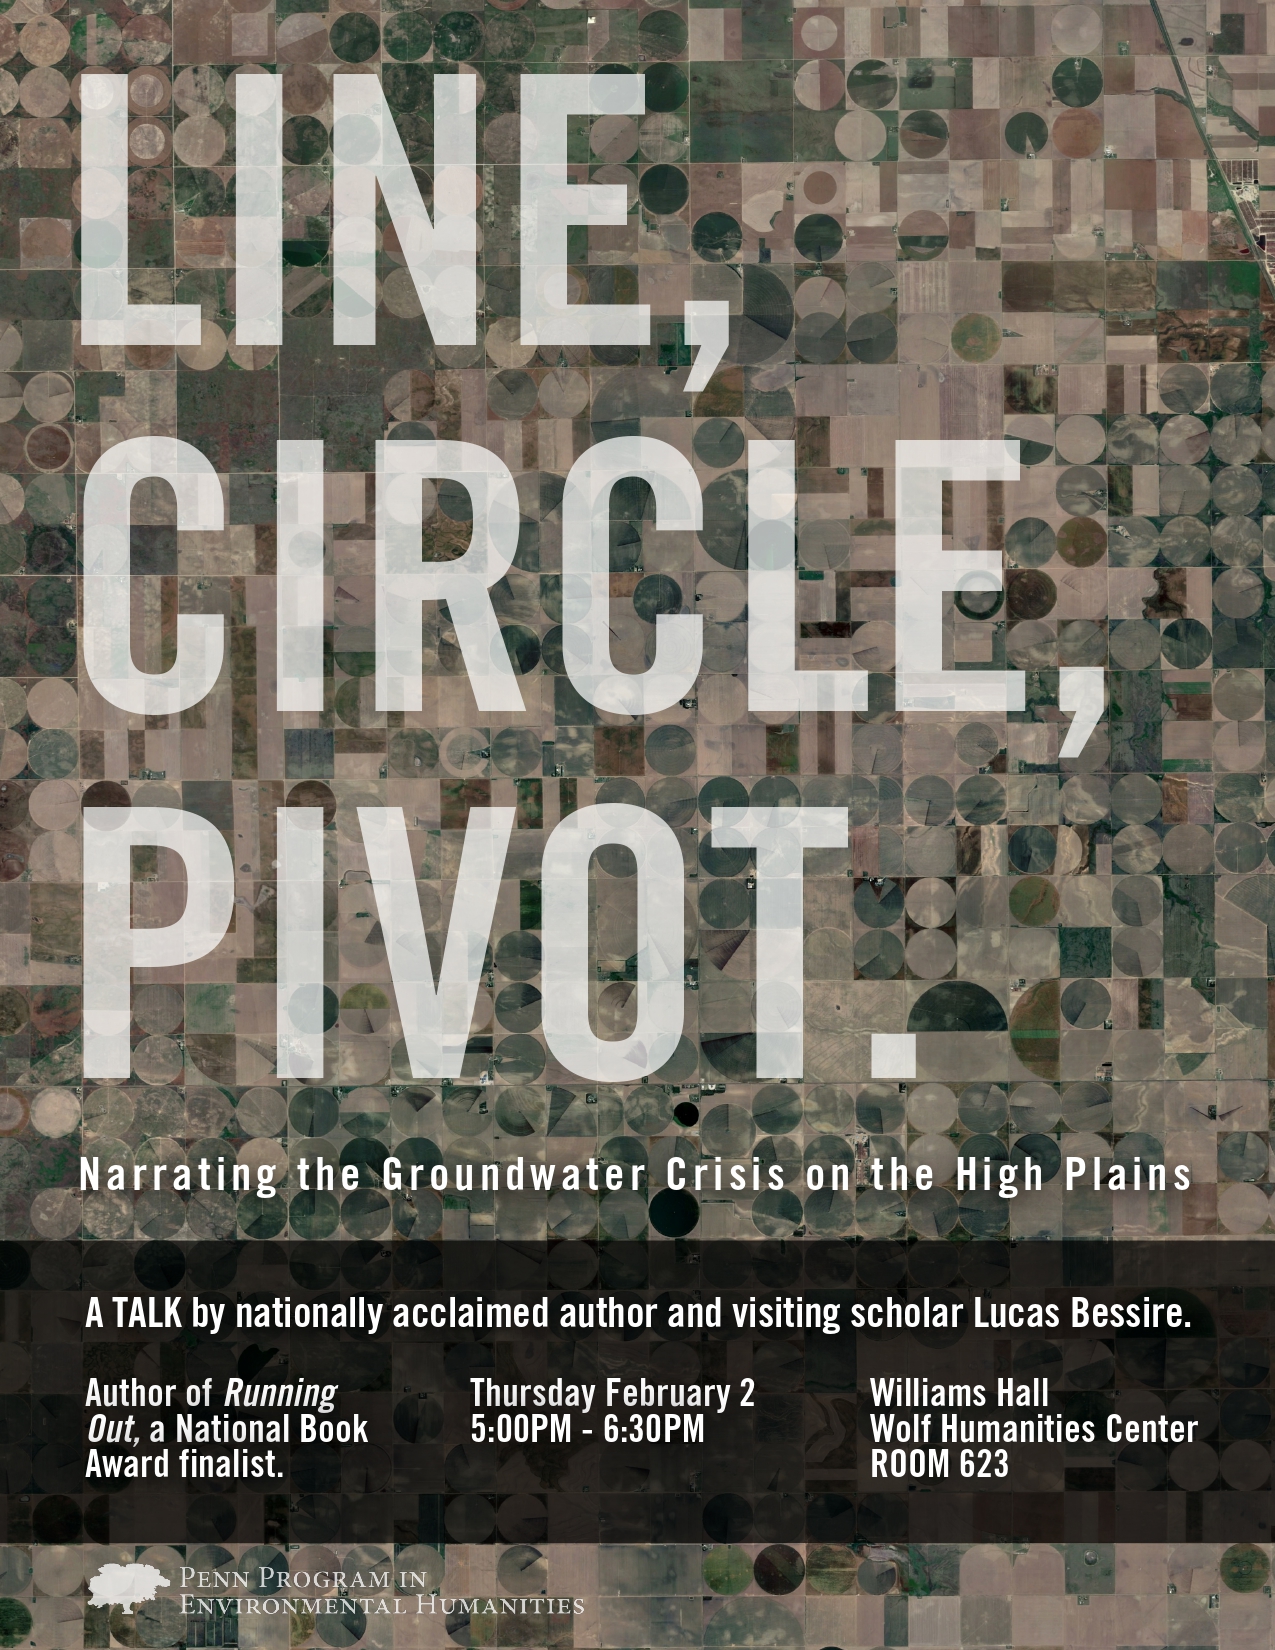 Poster advertising "Lina, Circle, Pivot." talk with Lucas Bessire. 